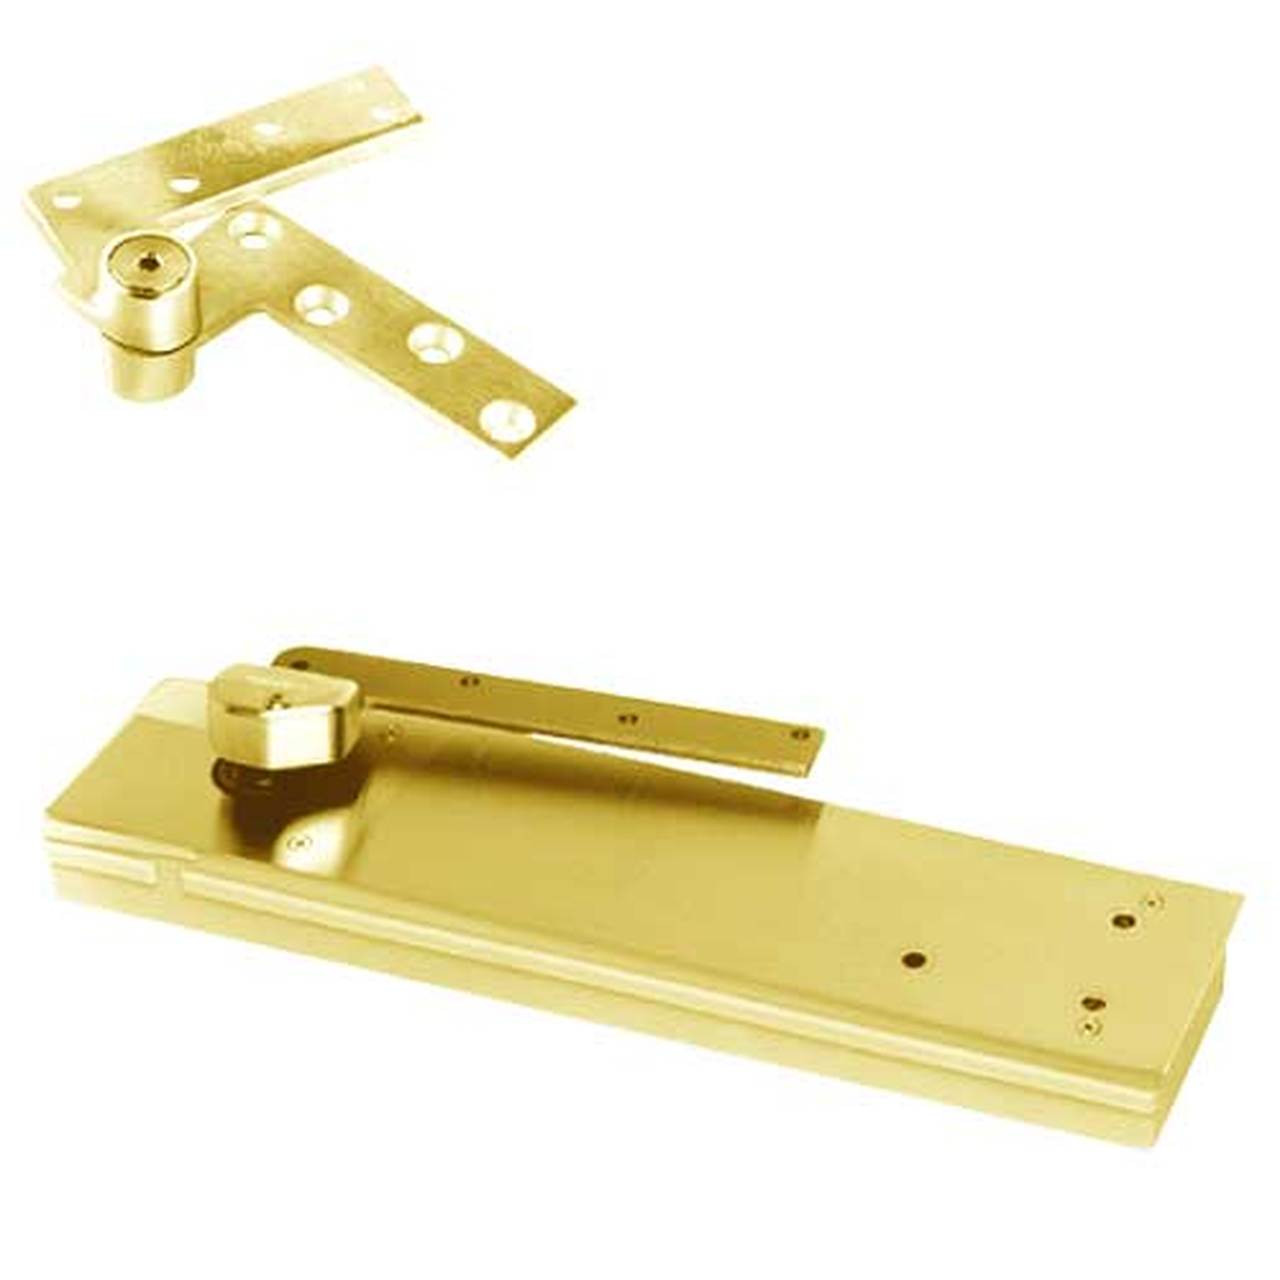 FHM5105NBC-LCC-RH-605 Rixson HM51 Series 3/4" Offset Hung Shallow Depth Floor Closers in Bright Brass Finish